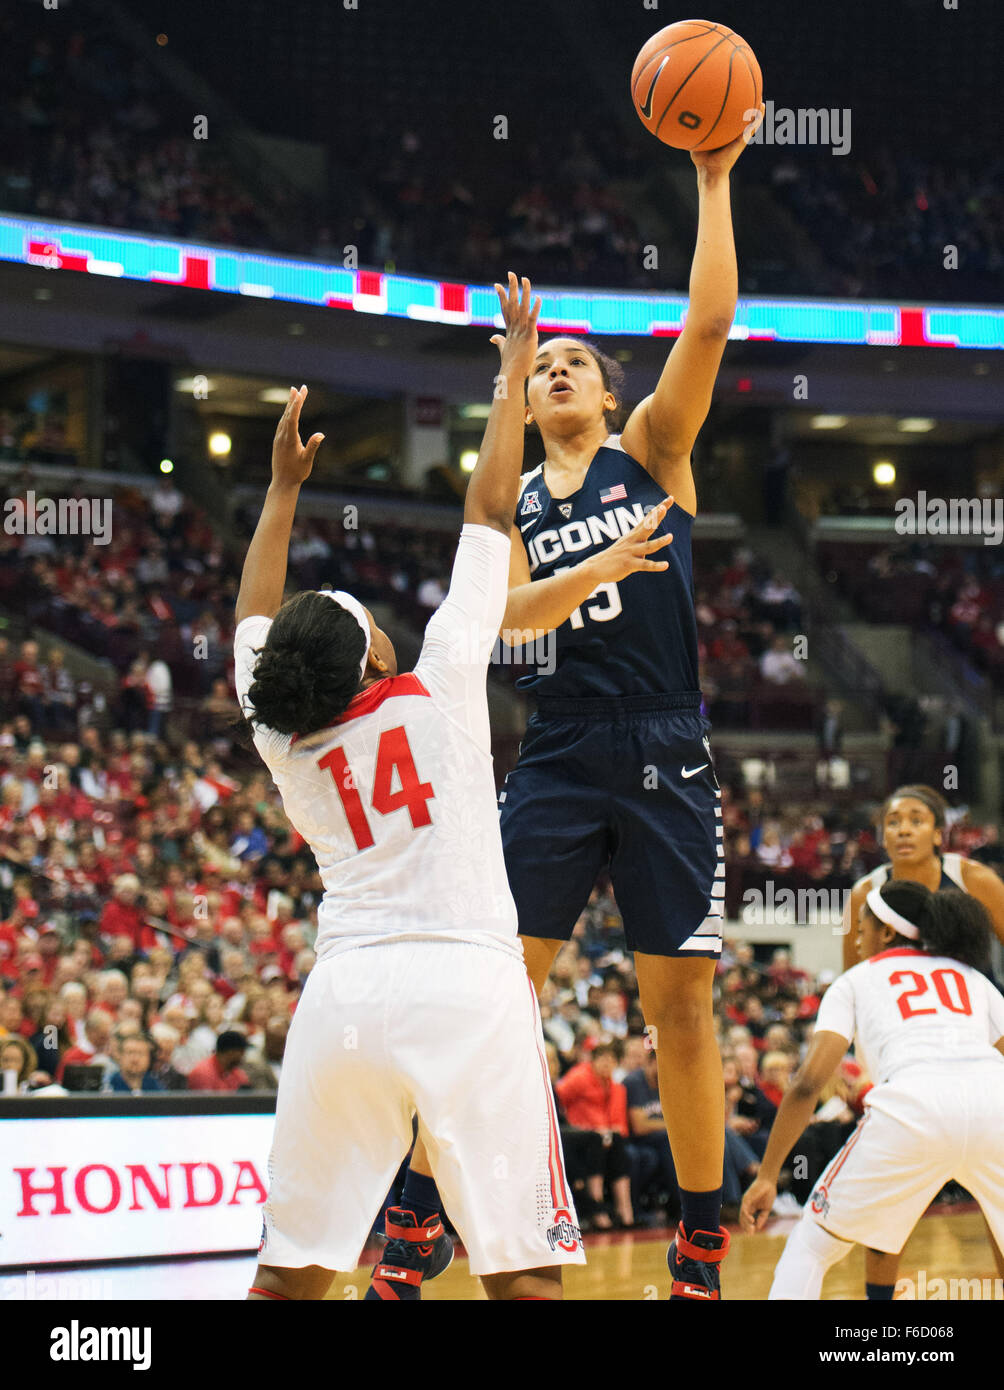 Columbus, Ohio, USA. 16th Nov, 2015. Connecticut Huskies guard Gabby Williams (15) shoots the ball over Ohio State Buckeyes guard Ameryst Alston (14) in the 100-56 victory over Ohio State in Columbus, Ohio. Brent Clark/CSM/Alamy Live News Stock Photo